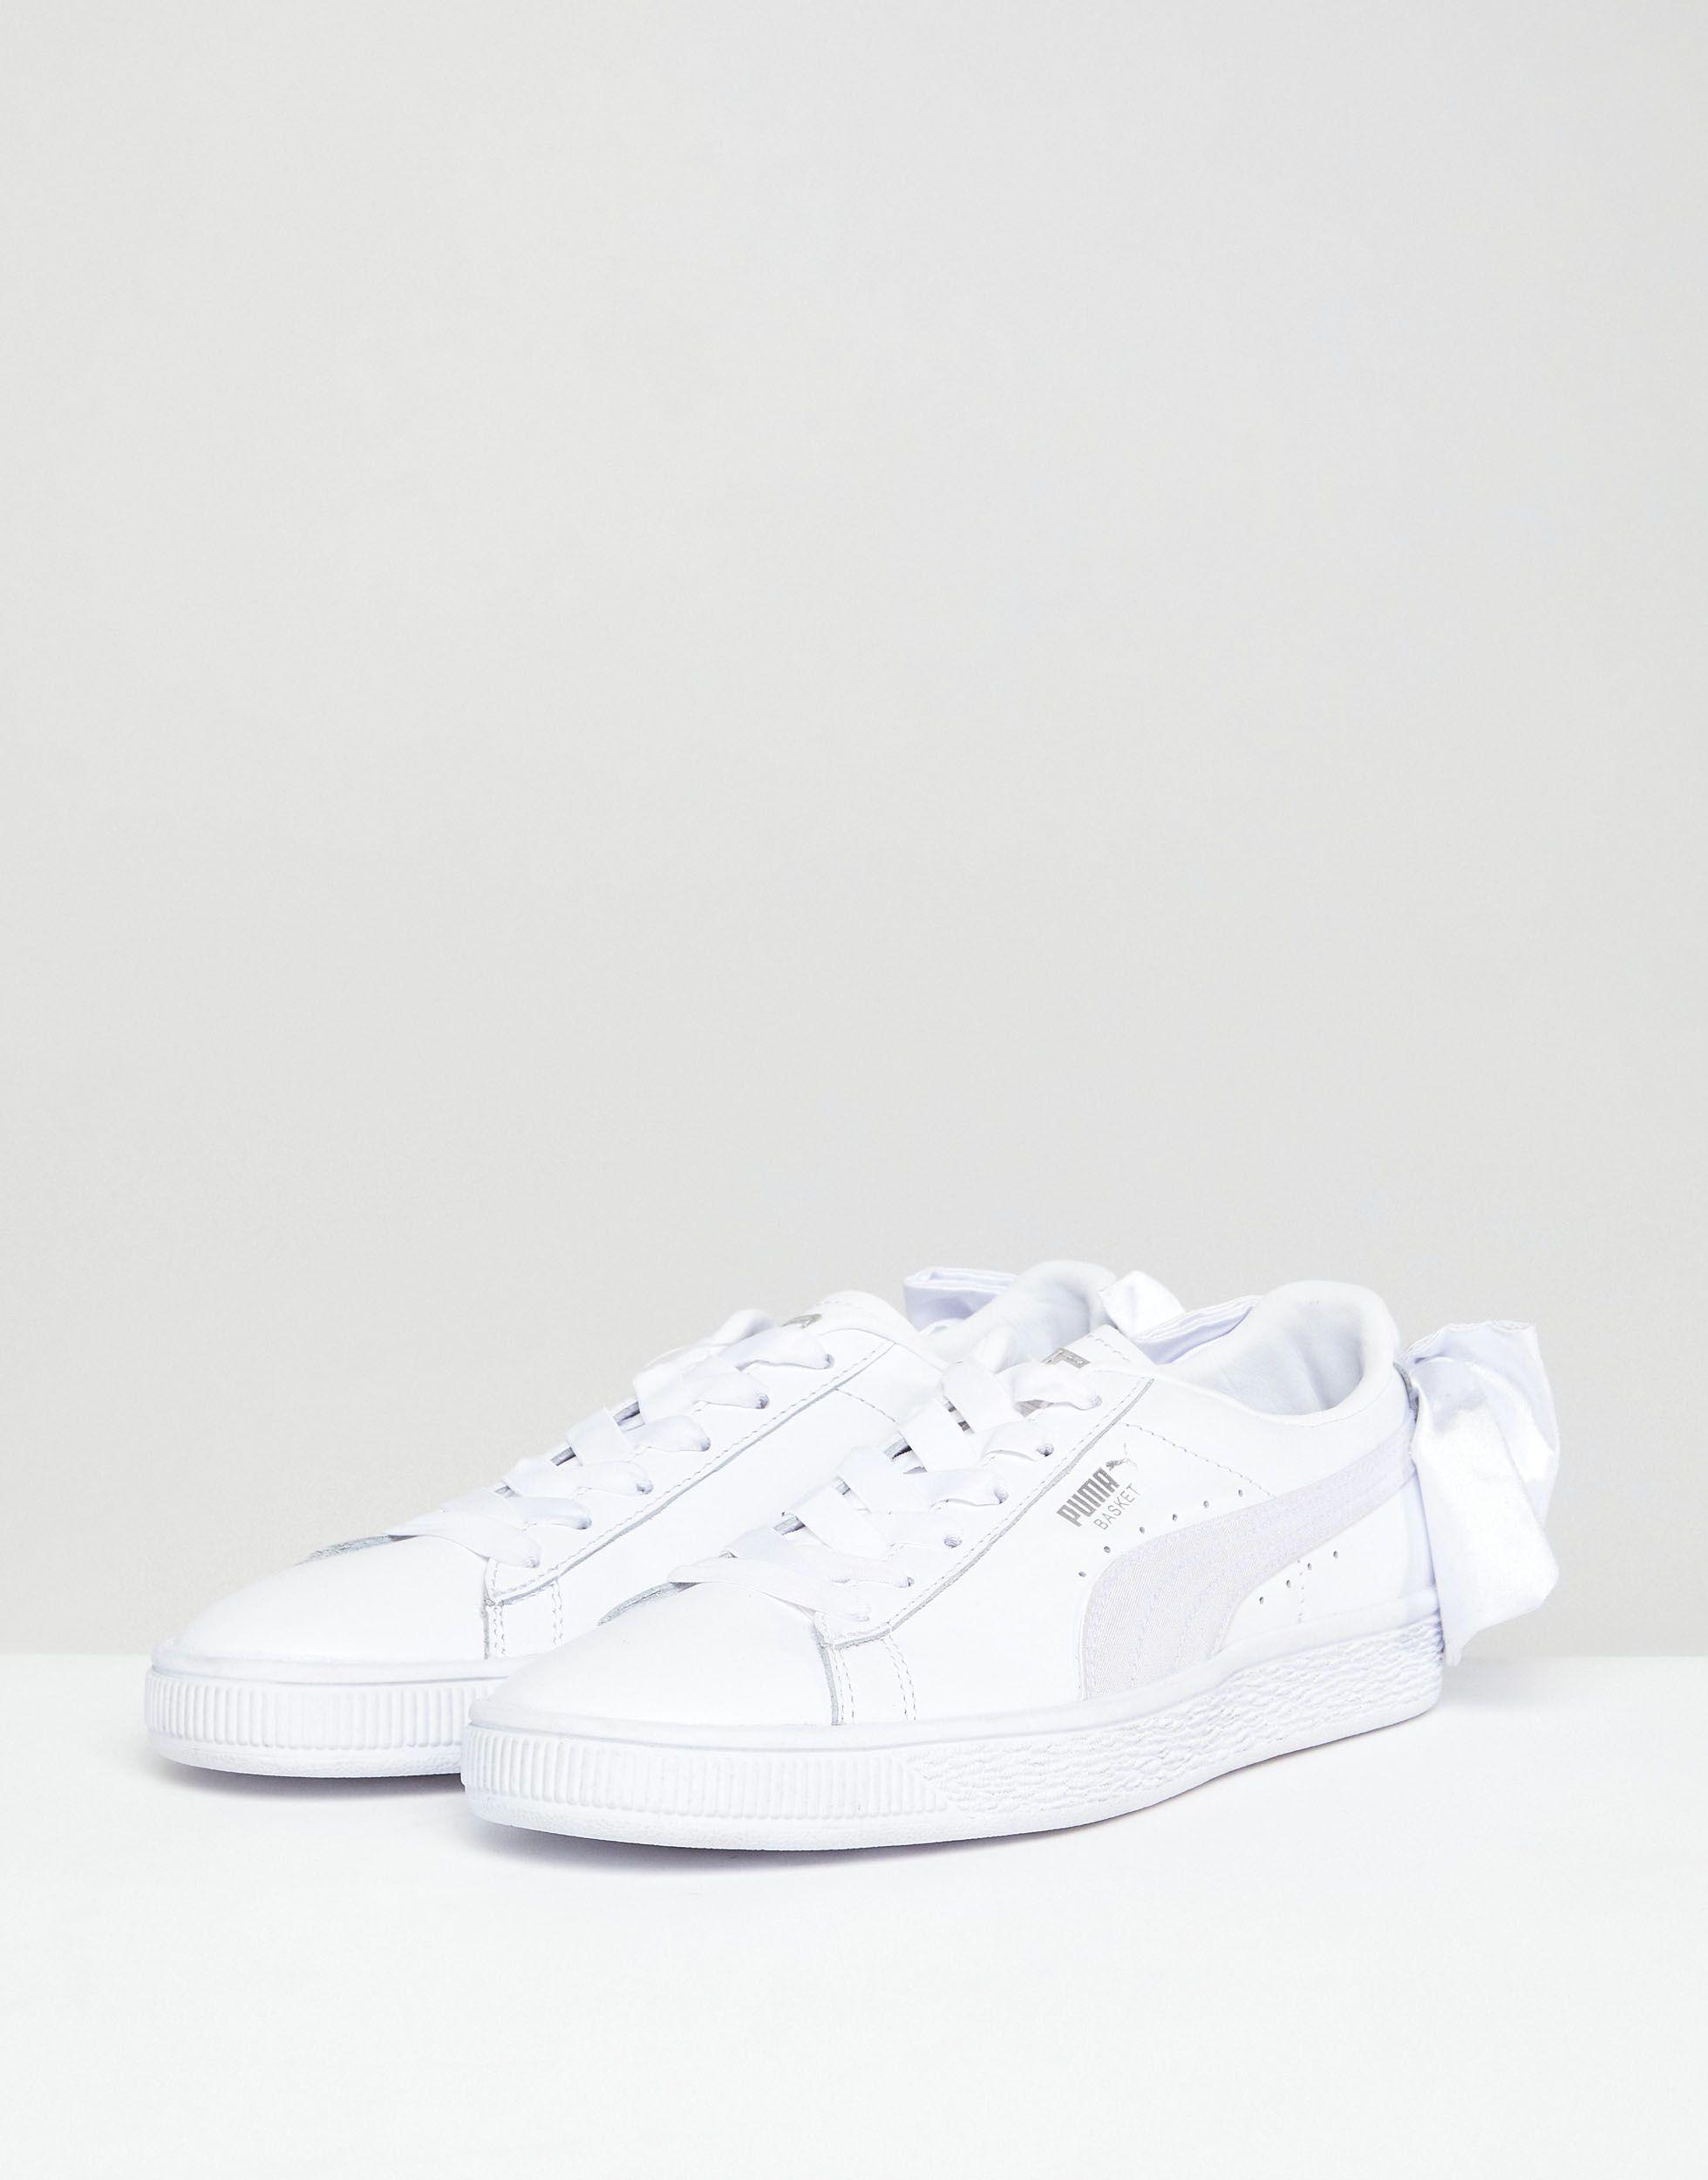 PUMA Suede Bow Trainers in White - Lyst